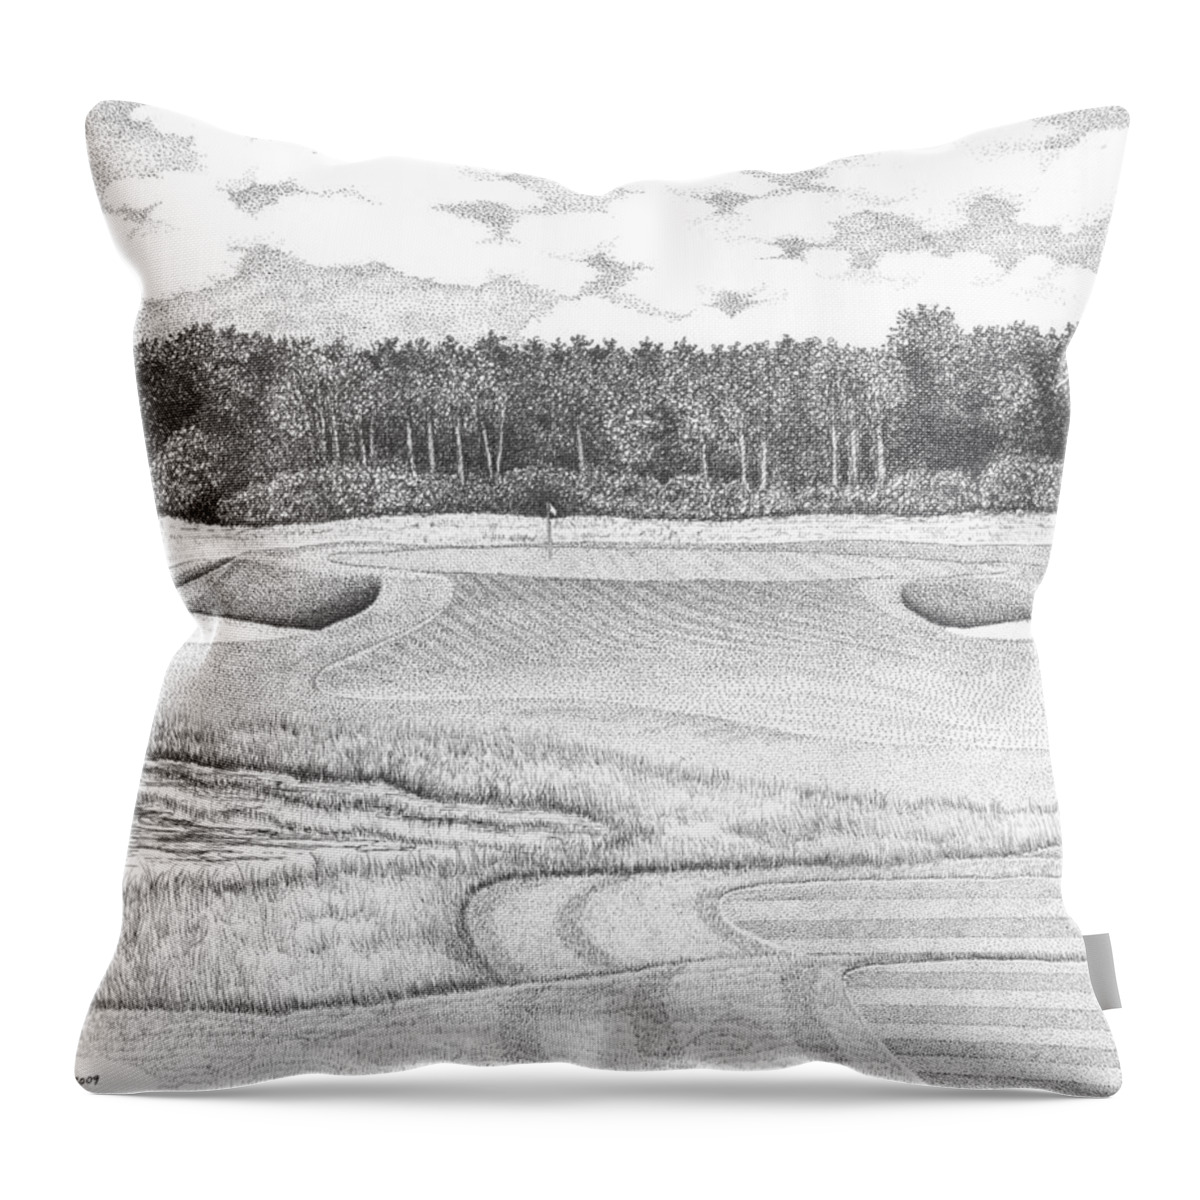 Golf Throw Pillow featuring the drawing 11th Hole - Trump National Golf Club by Lawrence Tripoli